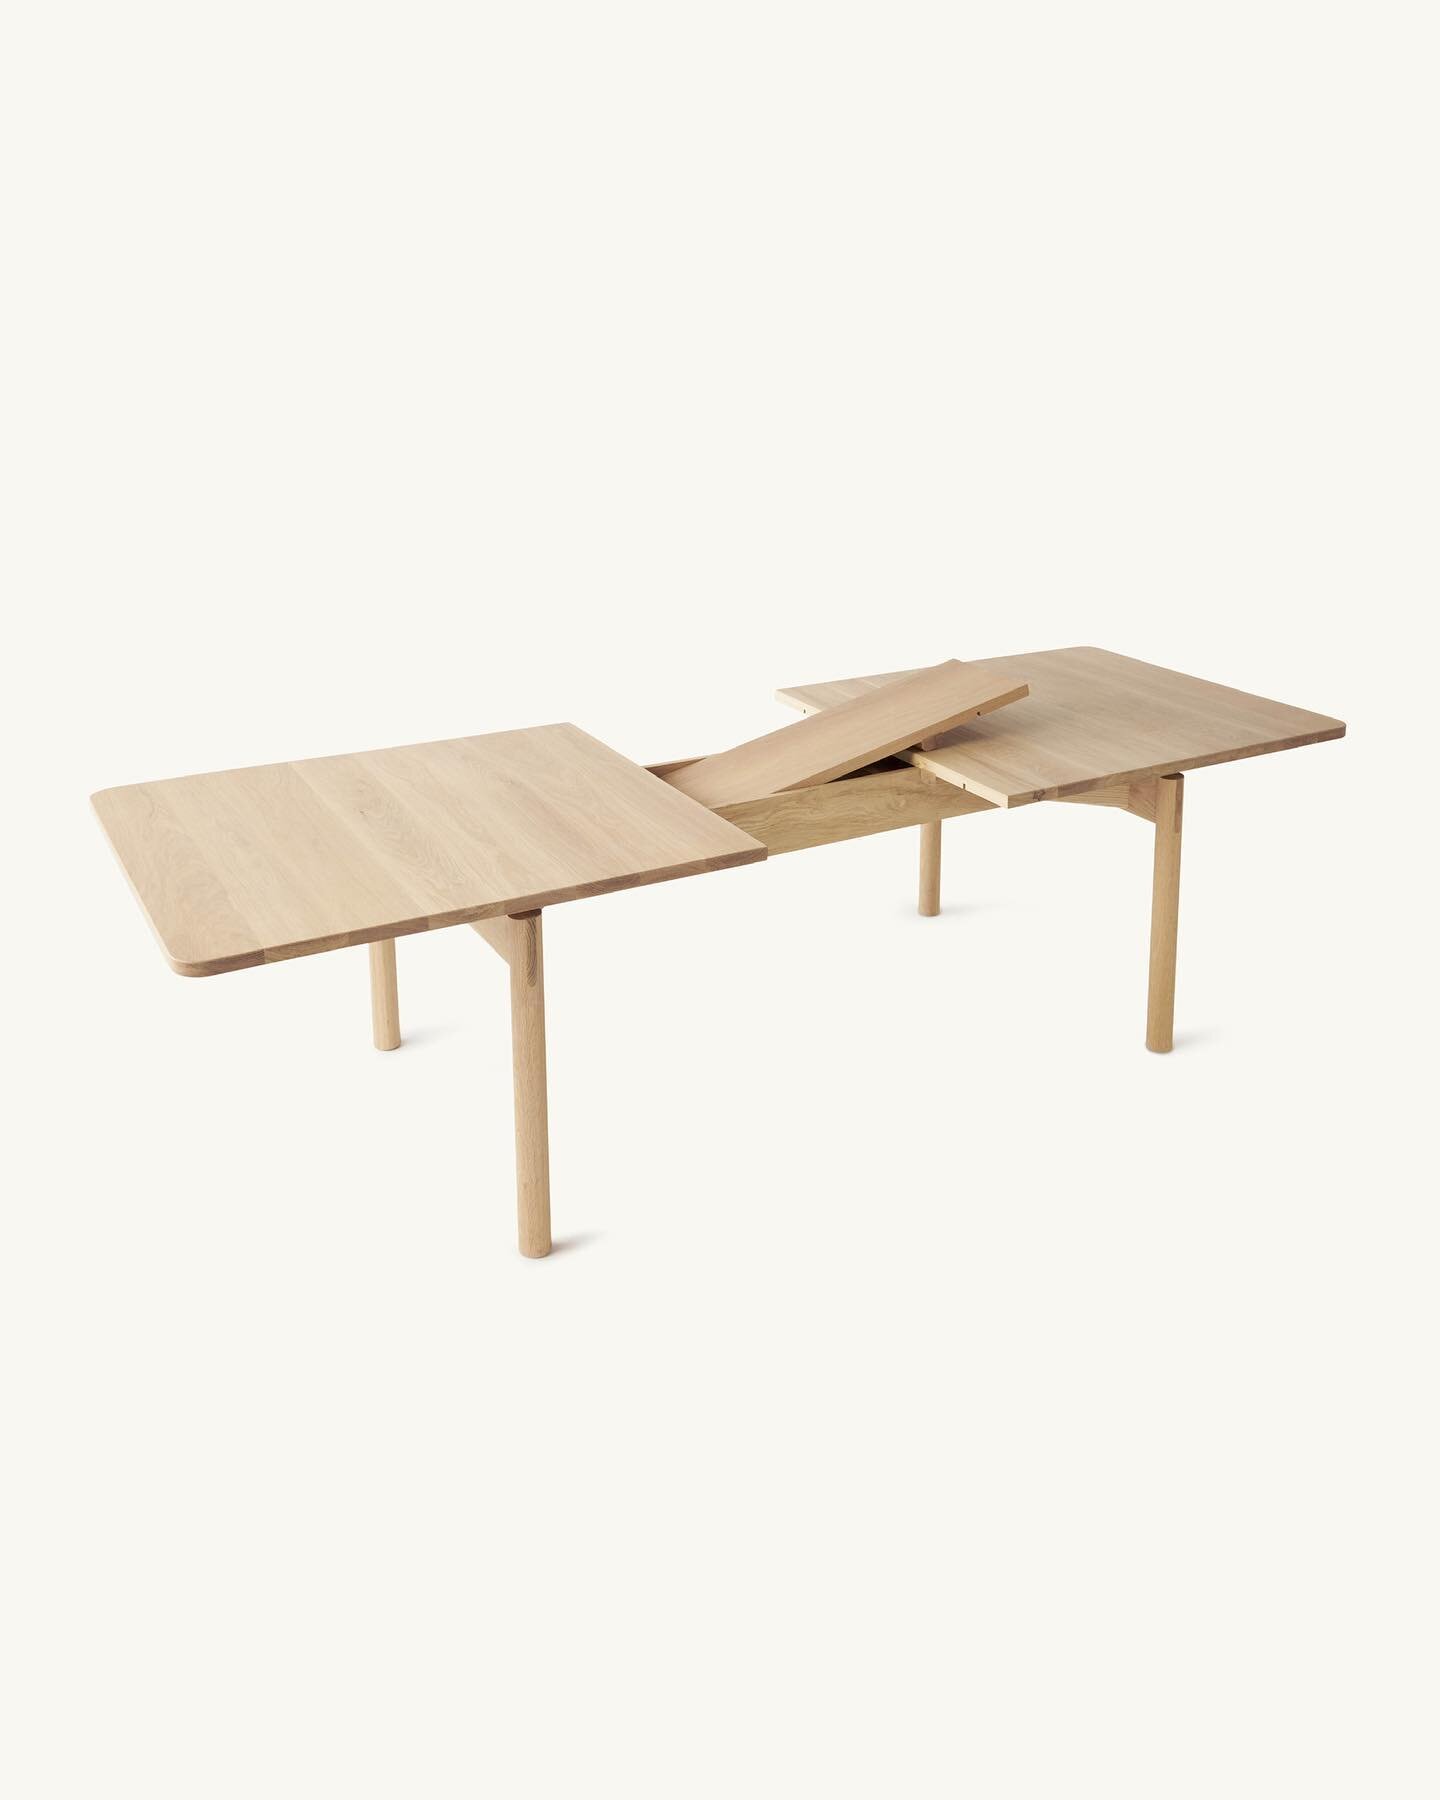 The Together Table Extendable packs its parts within its frame. 

Additional table top space enables additional seating space, as such the table can seat from 4-8, plus extra on the ends :)

Solid timber throughout. Pictured in American Oak.

Photogr